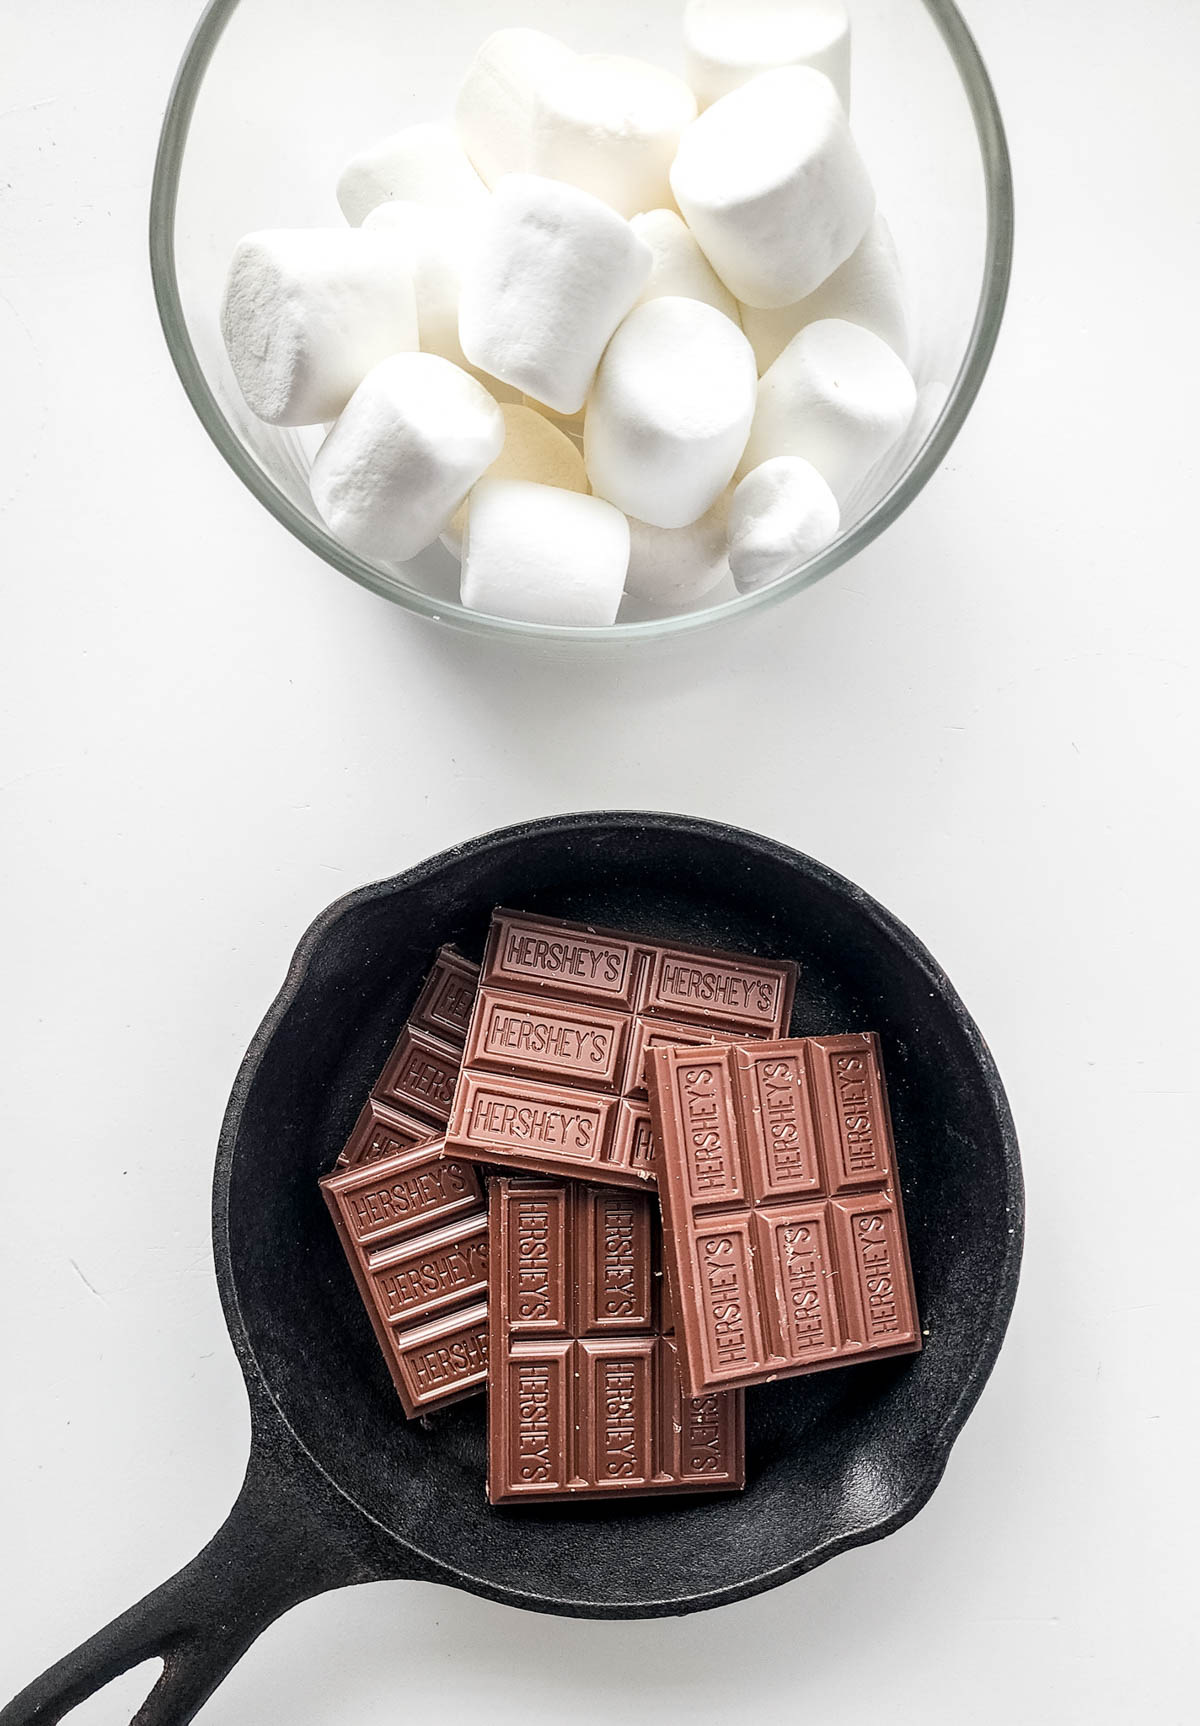 Chocolate squares and marshmallows